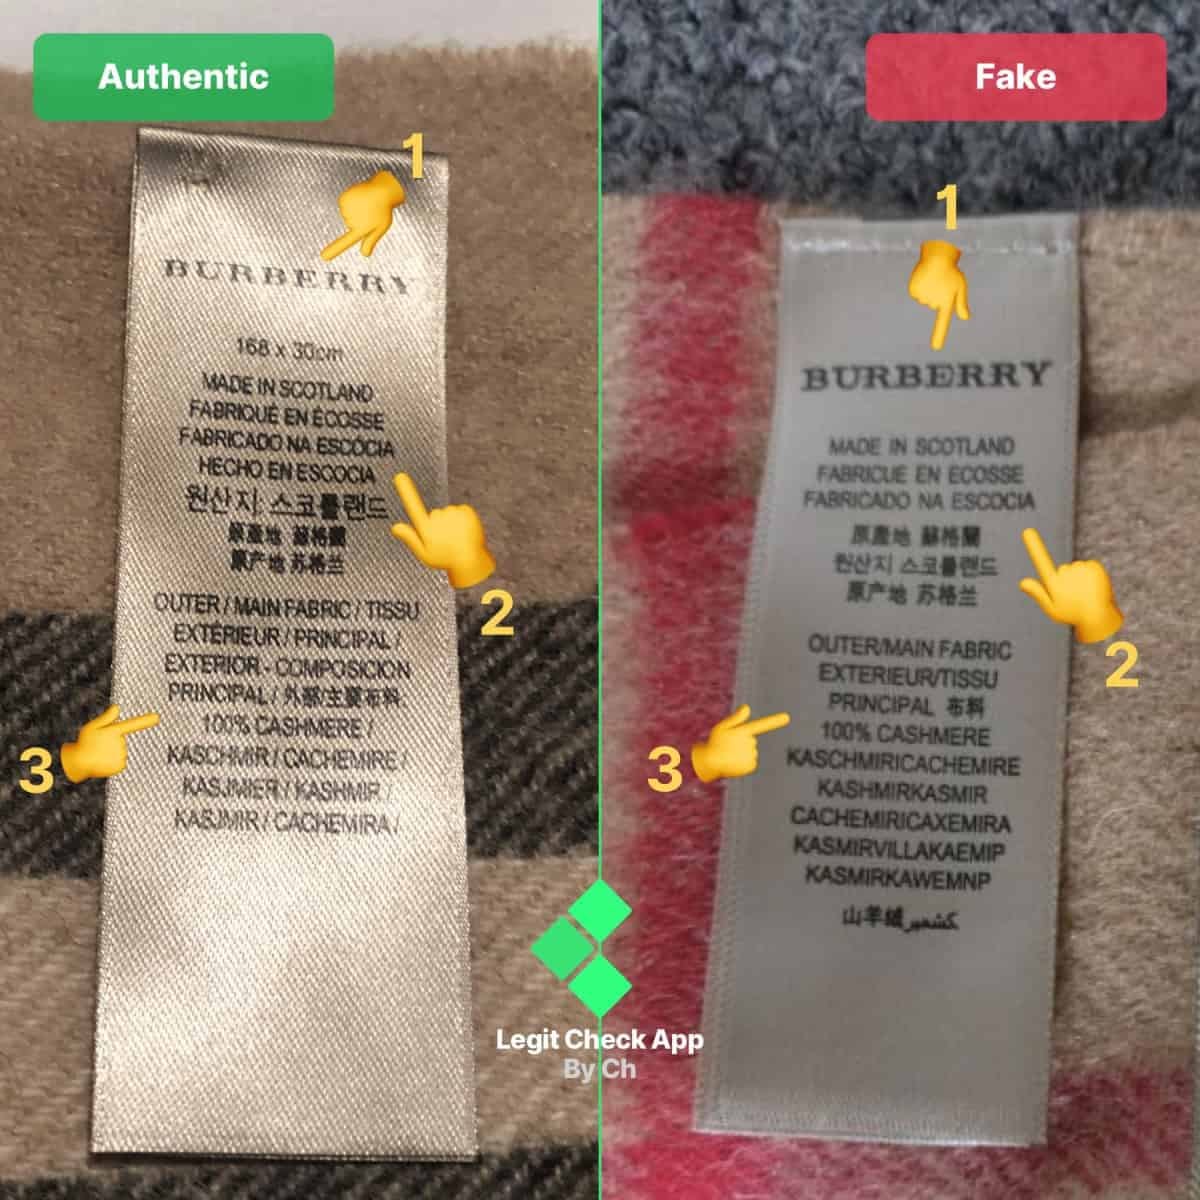 How To Spot Fake Scarves | by Legit Check Ch | Medium